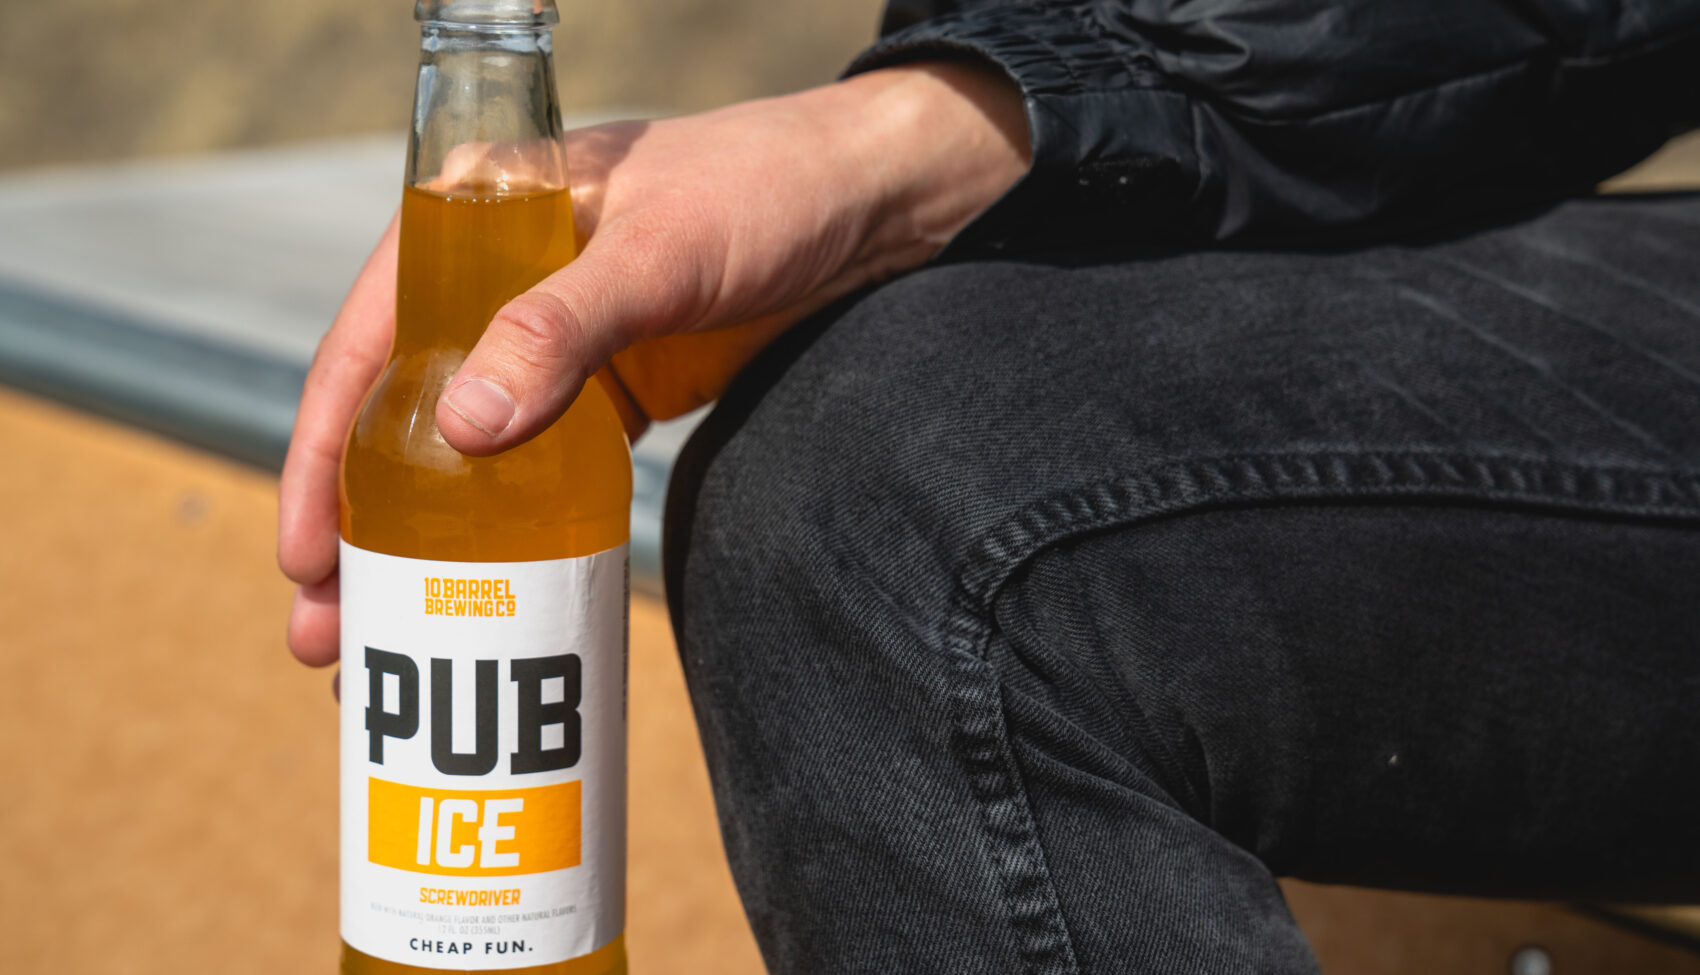 Learn More about Pub Ice Screwdriver